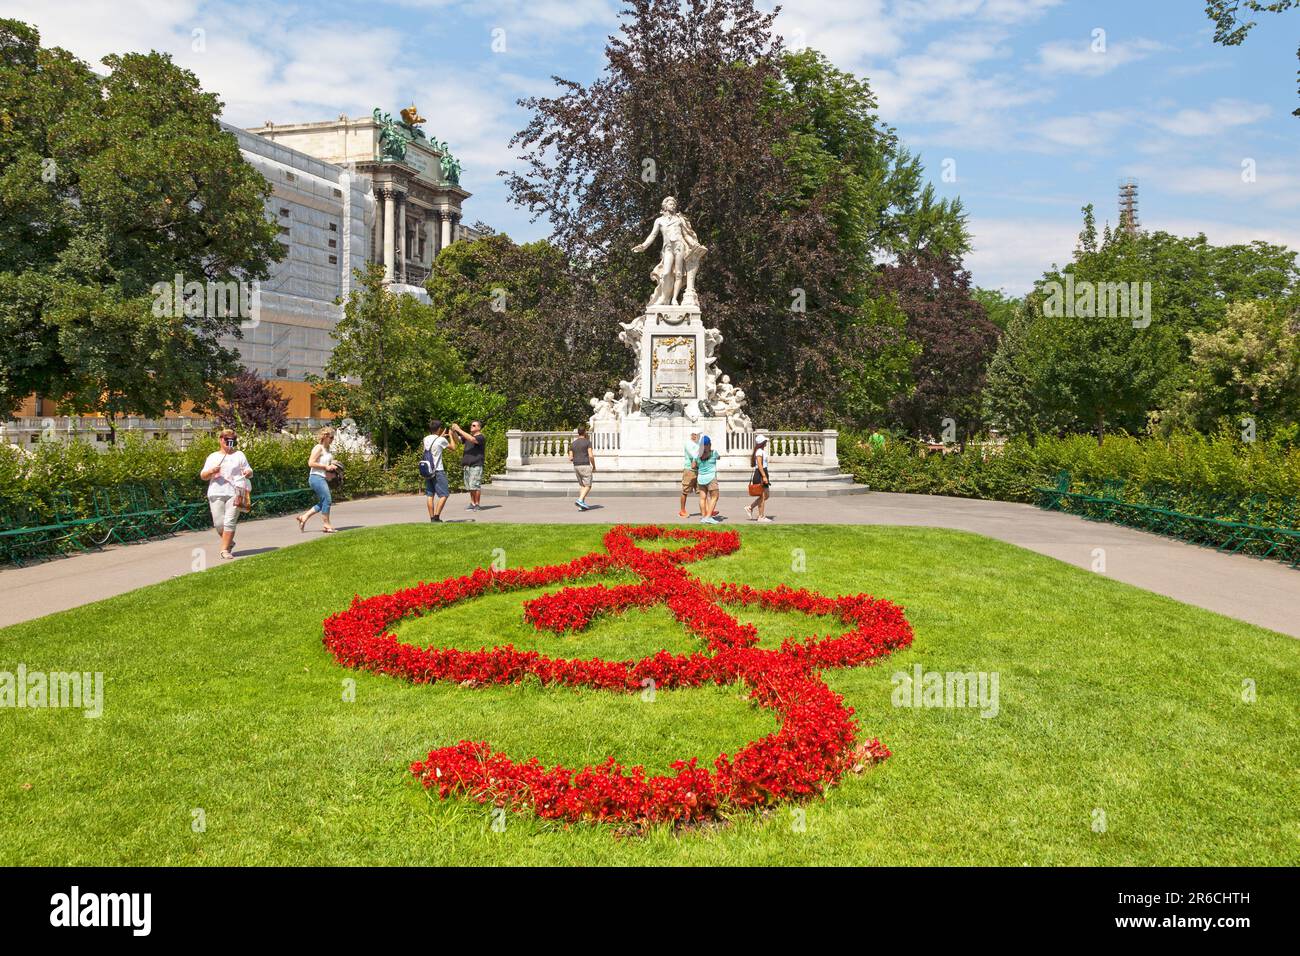 Vienna, Austria - June 17 2018: The Mozart Monument (German: Mozart-Denkmal) is a monument located in the Burggarten. It is dedicated to componist Wol Stock Photo